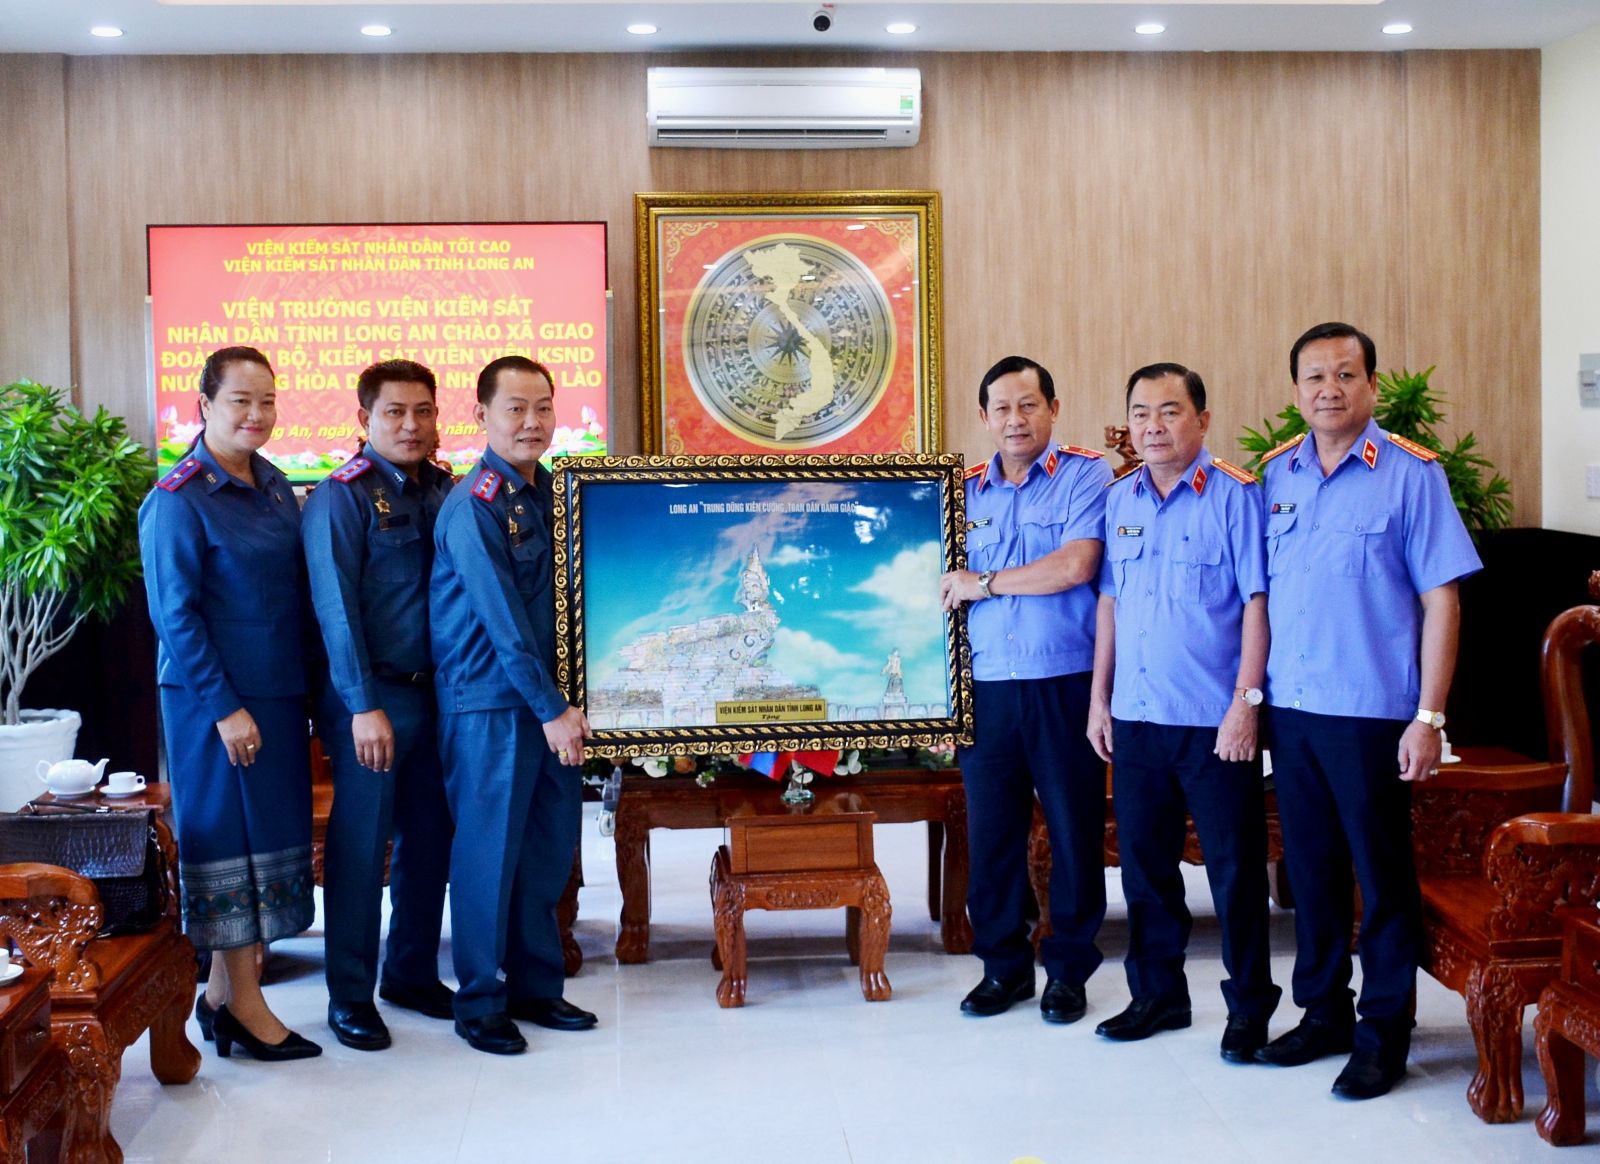 Procurator General of the Provincial People's Procuracy - Truong Van Nghi presents souvenirs to the delegation of the People's Procuracy of Lao PDR